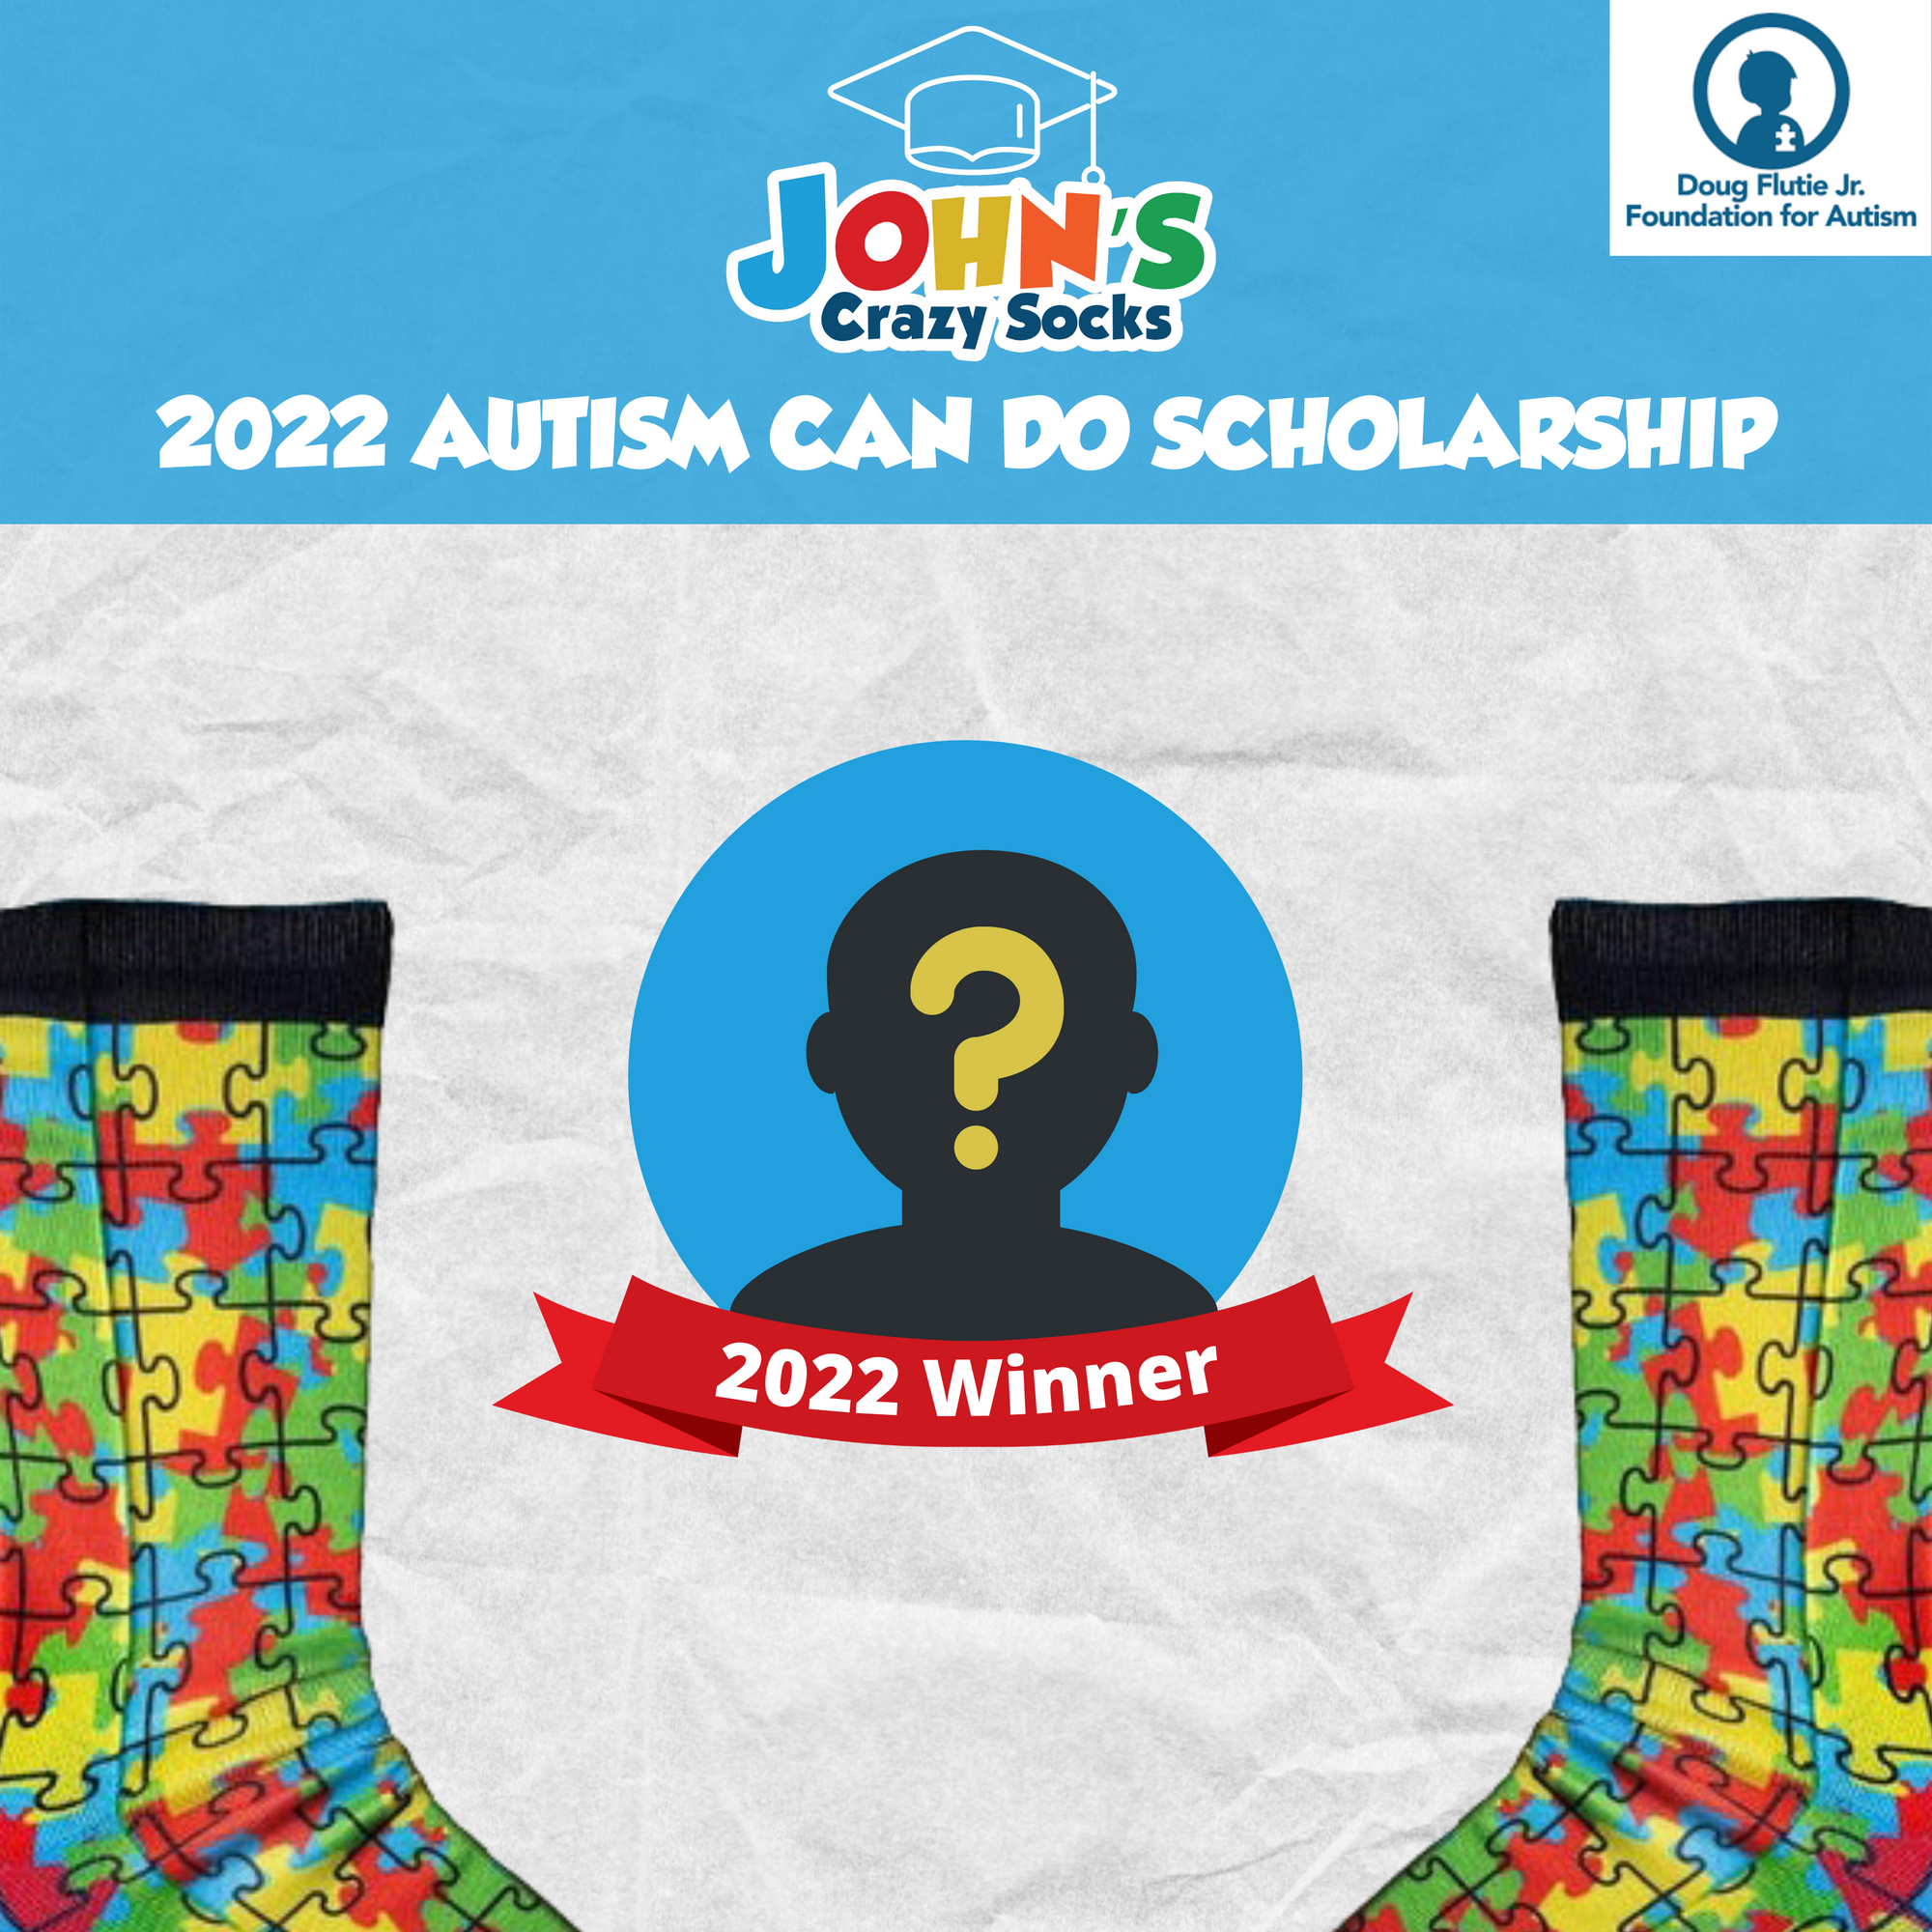 John's Crazy Socks Accepting Applications for the 2022 Autism Can Do Scholarship